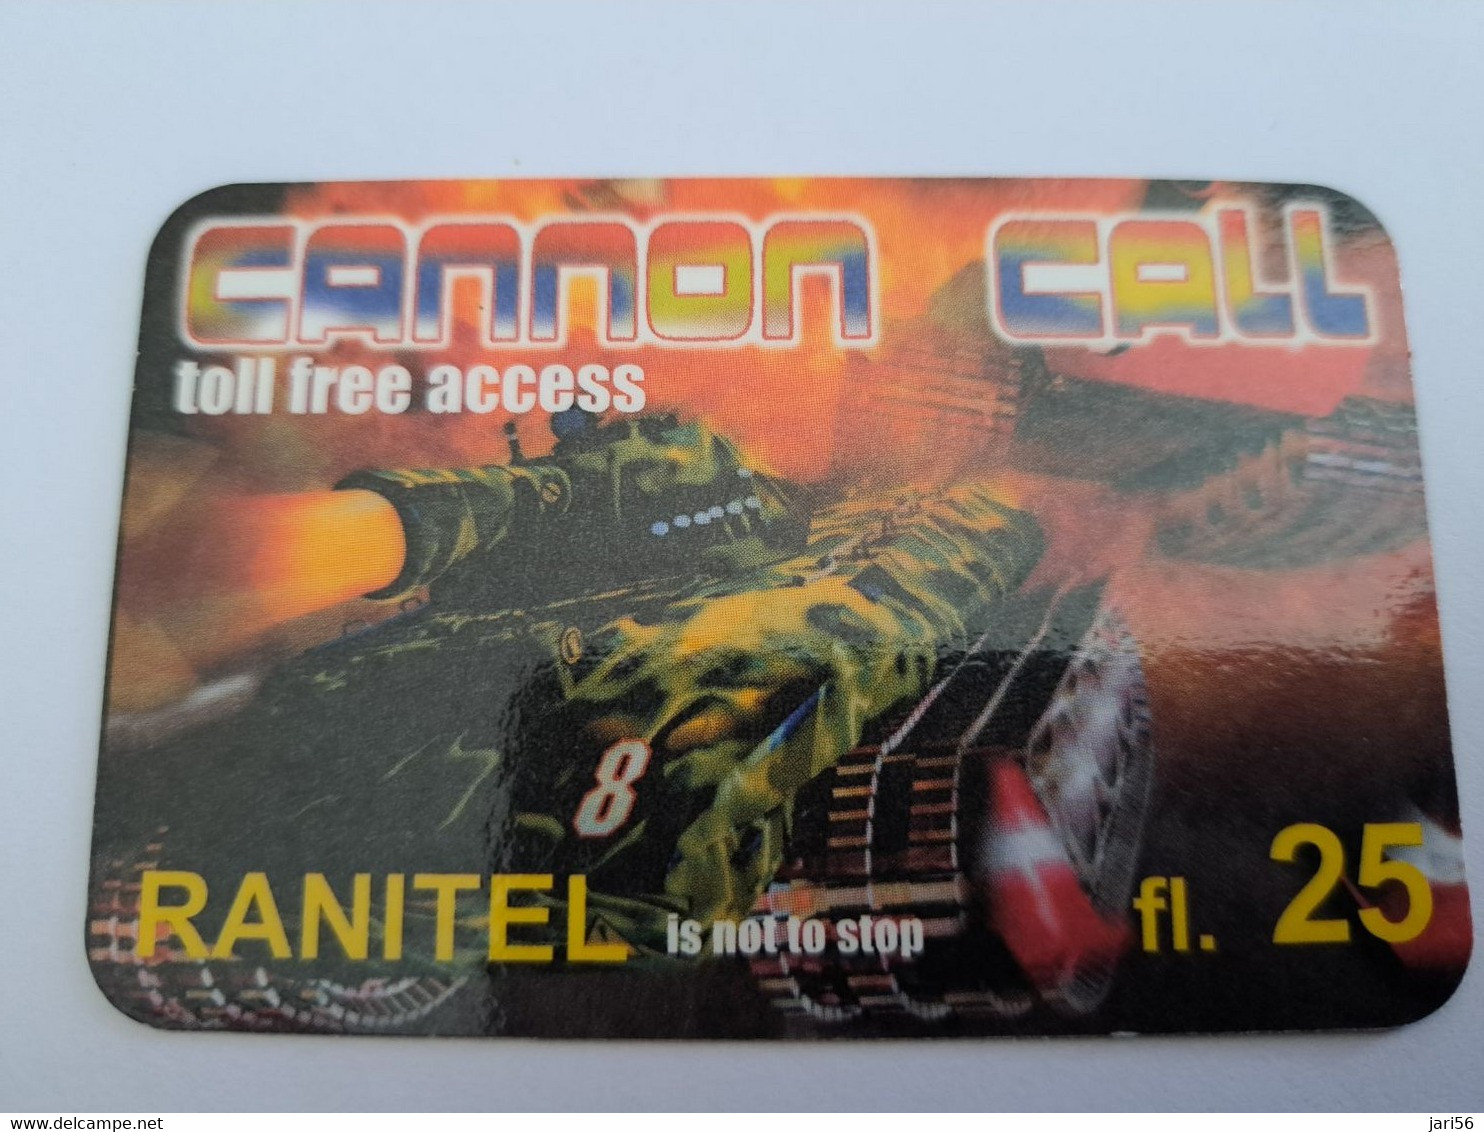 NETHERLANDS  HFL 25,-  CANNON CALL /RANITELL ARMY/TANK   / OLDER CARD    PREPAID  Nice Used  ** 11208** - Cartes GSM, Prépayées Et Recharges